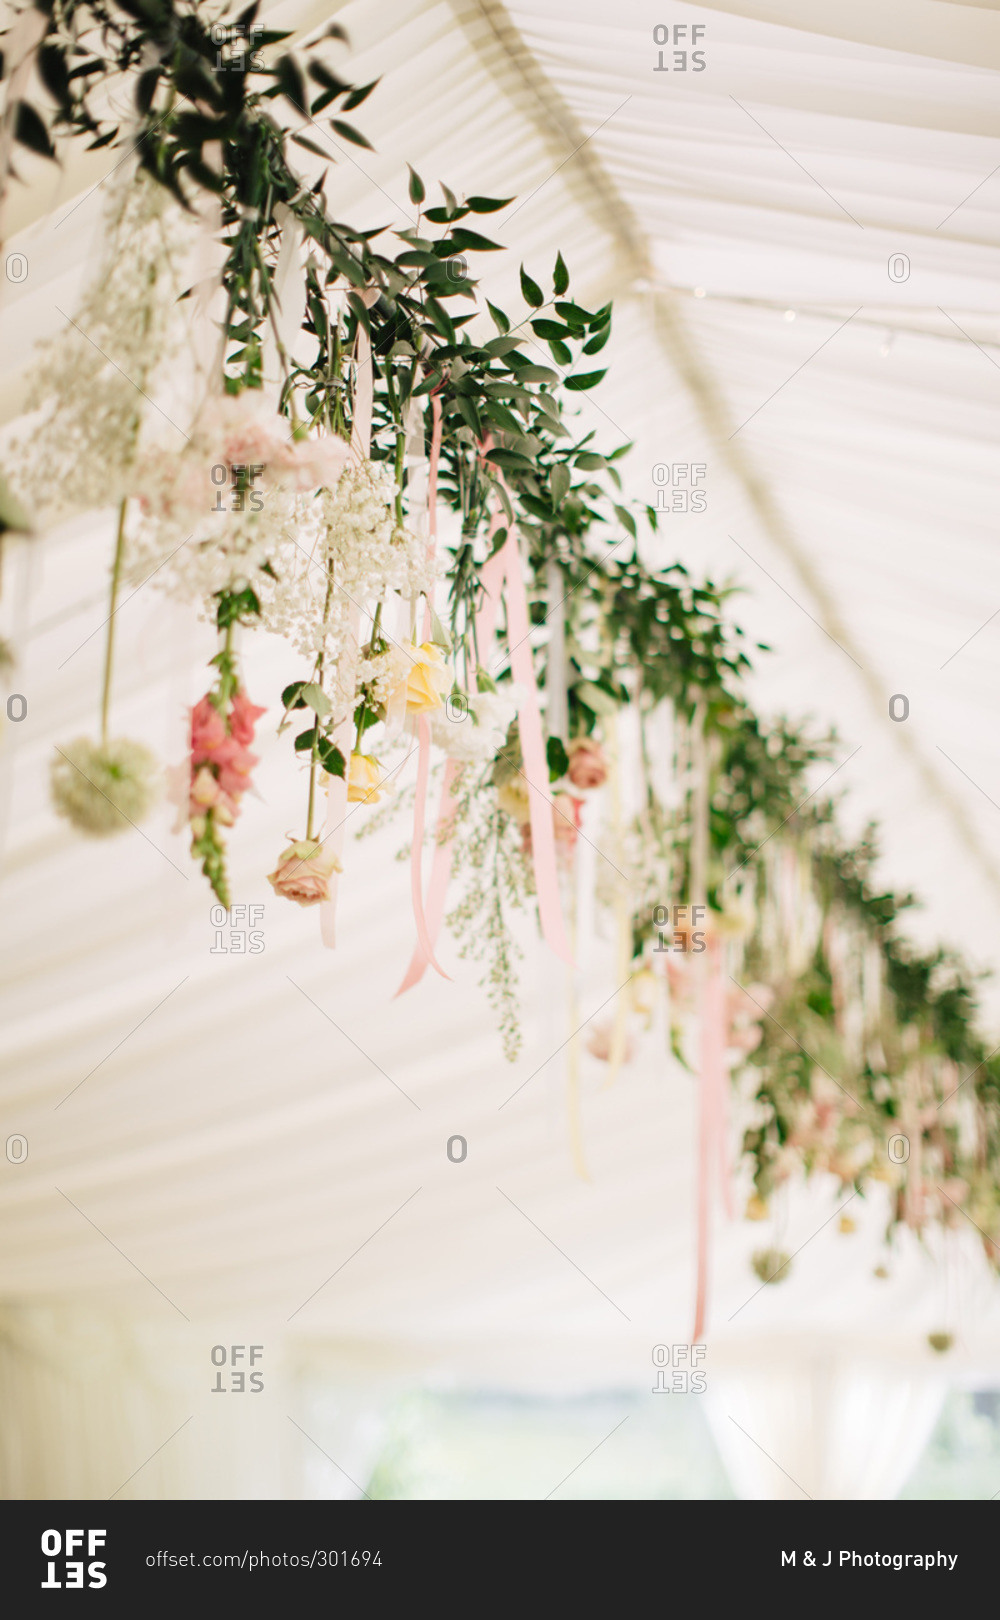 Garland of fresh flowers decorating tent for wedding reception